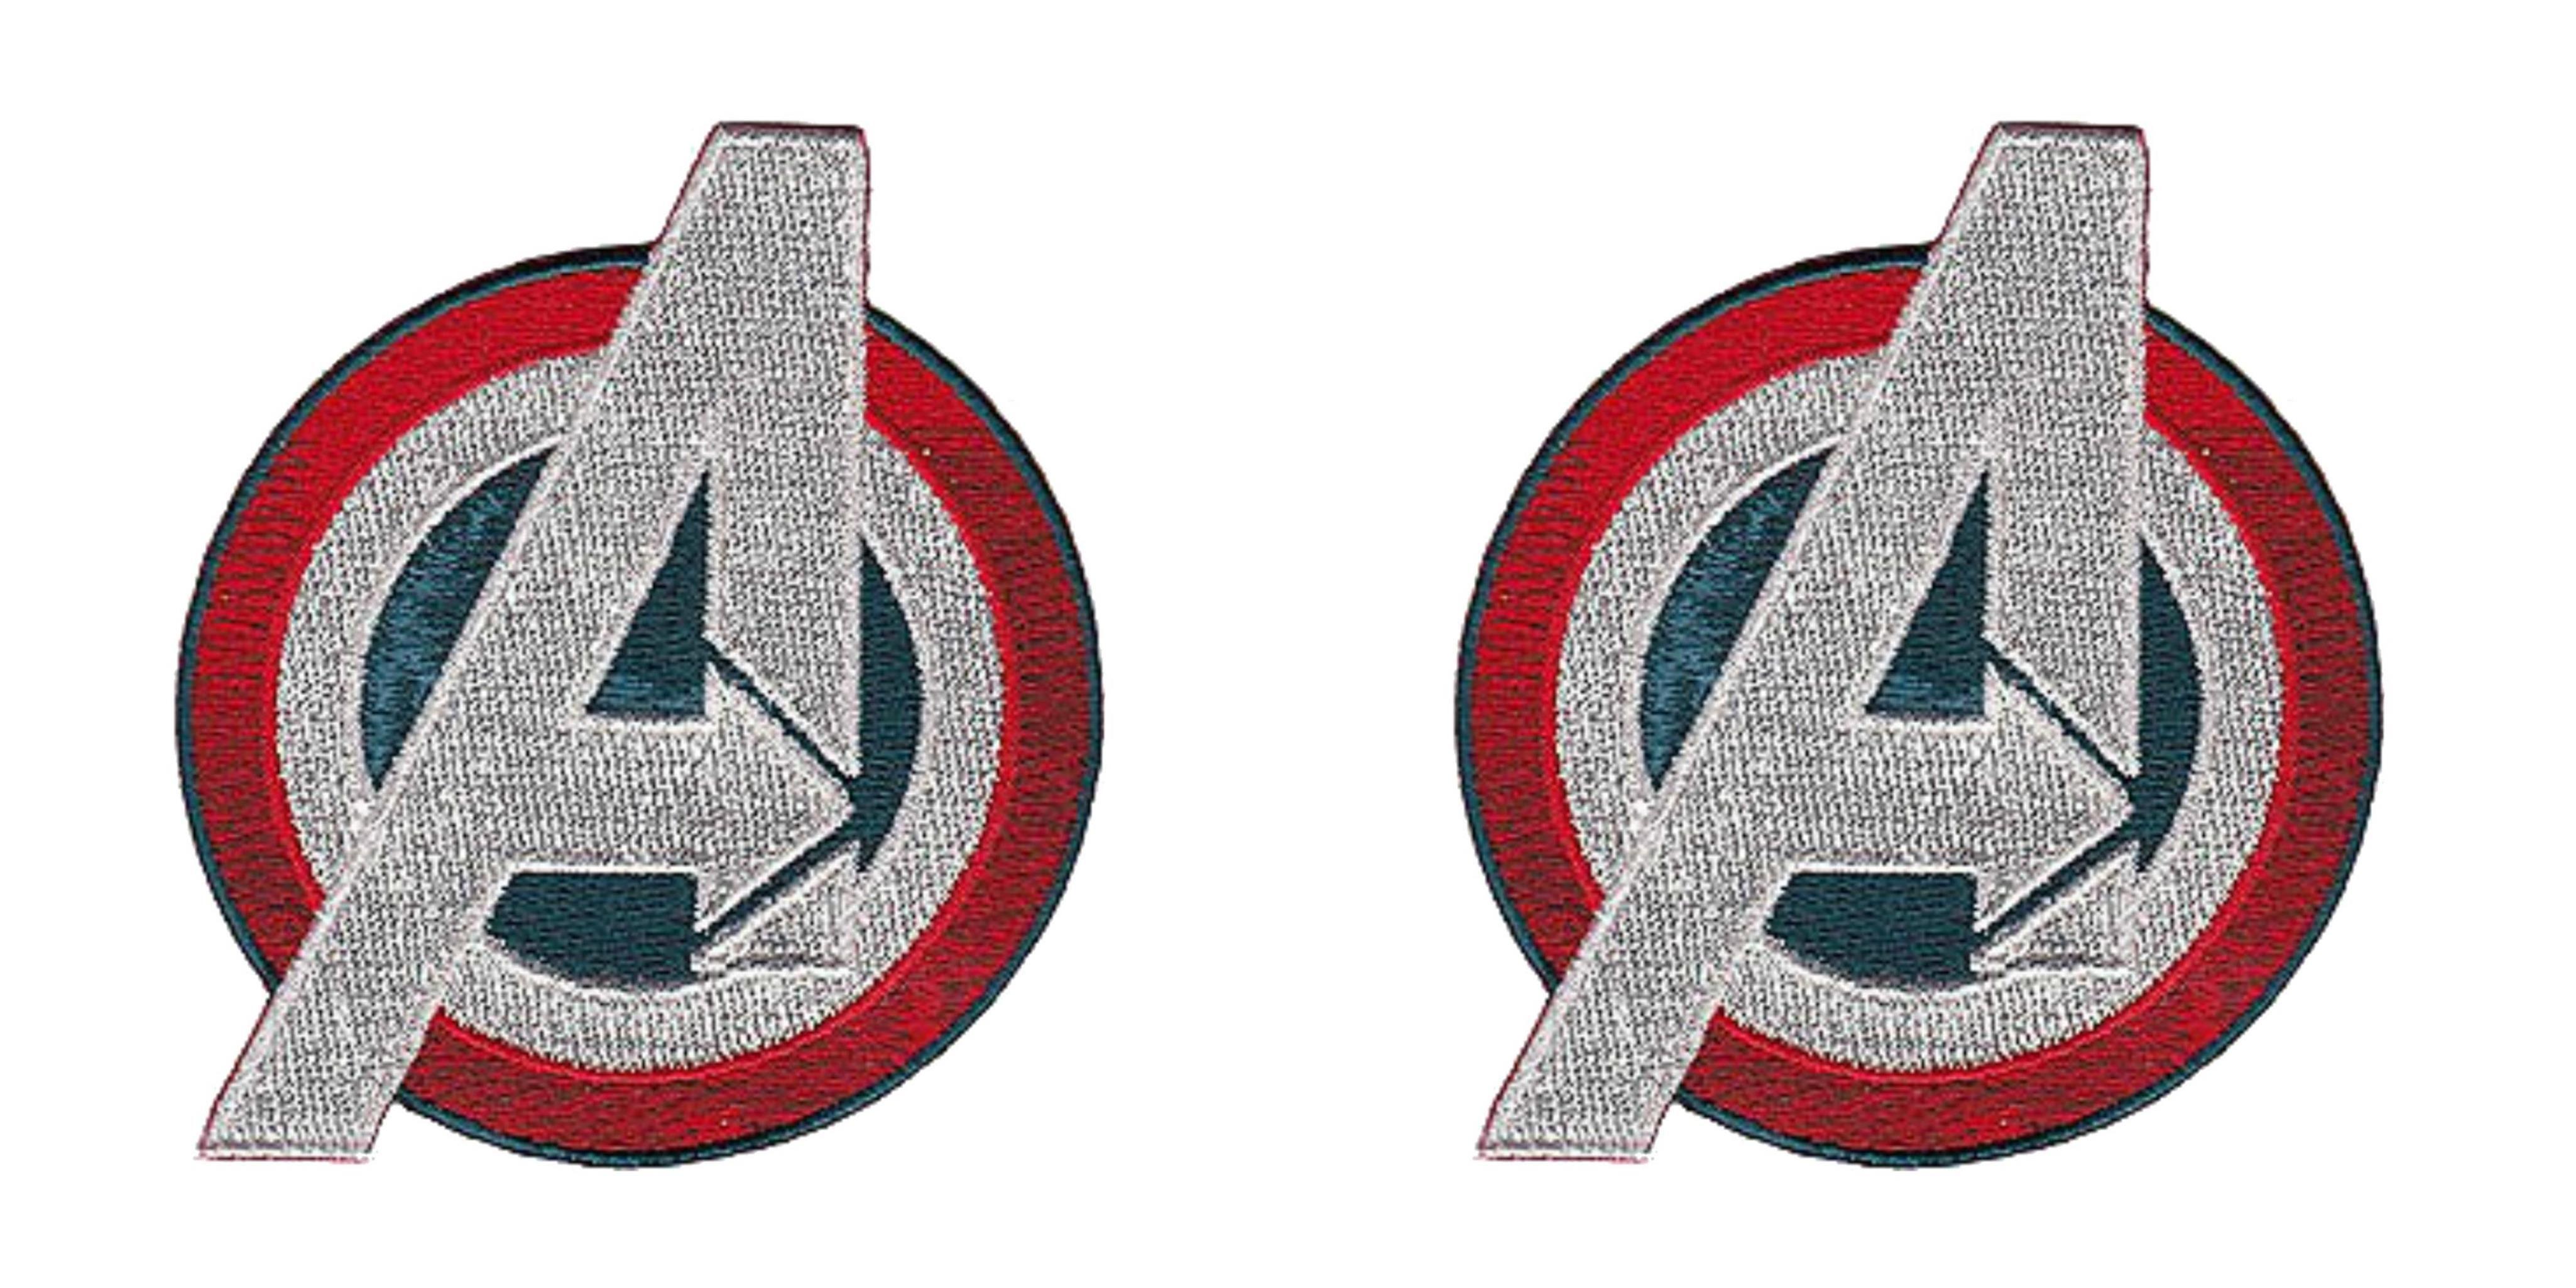 Red White Oval Logo - Superheroes Marvel Comics Avengers Red, White, and Blue Logo 3